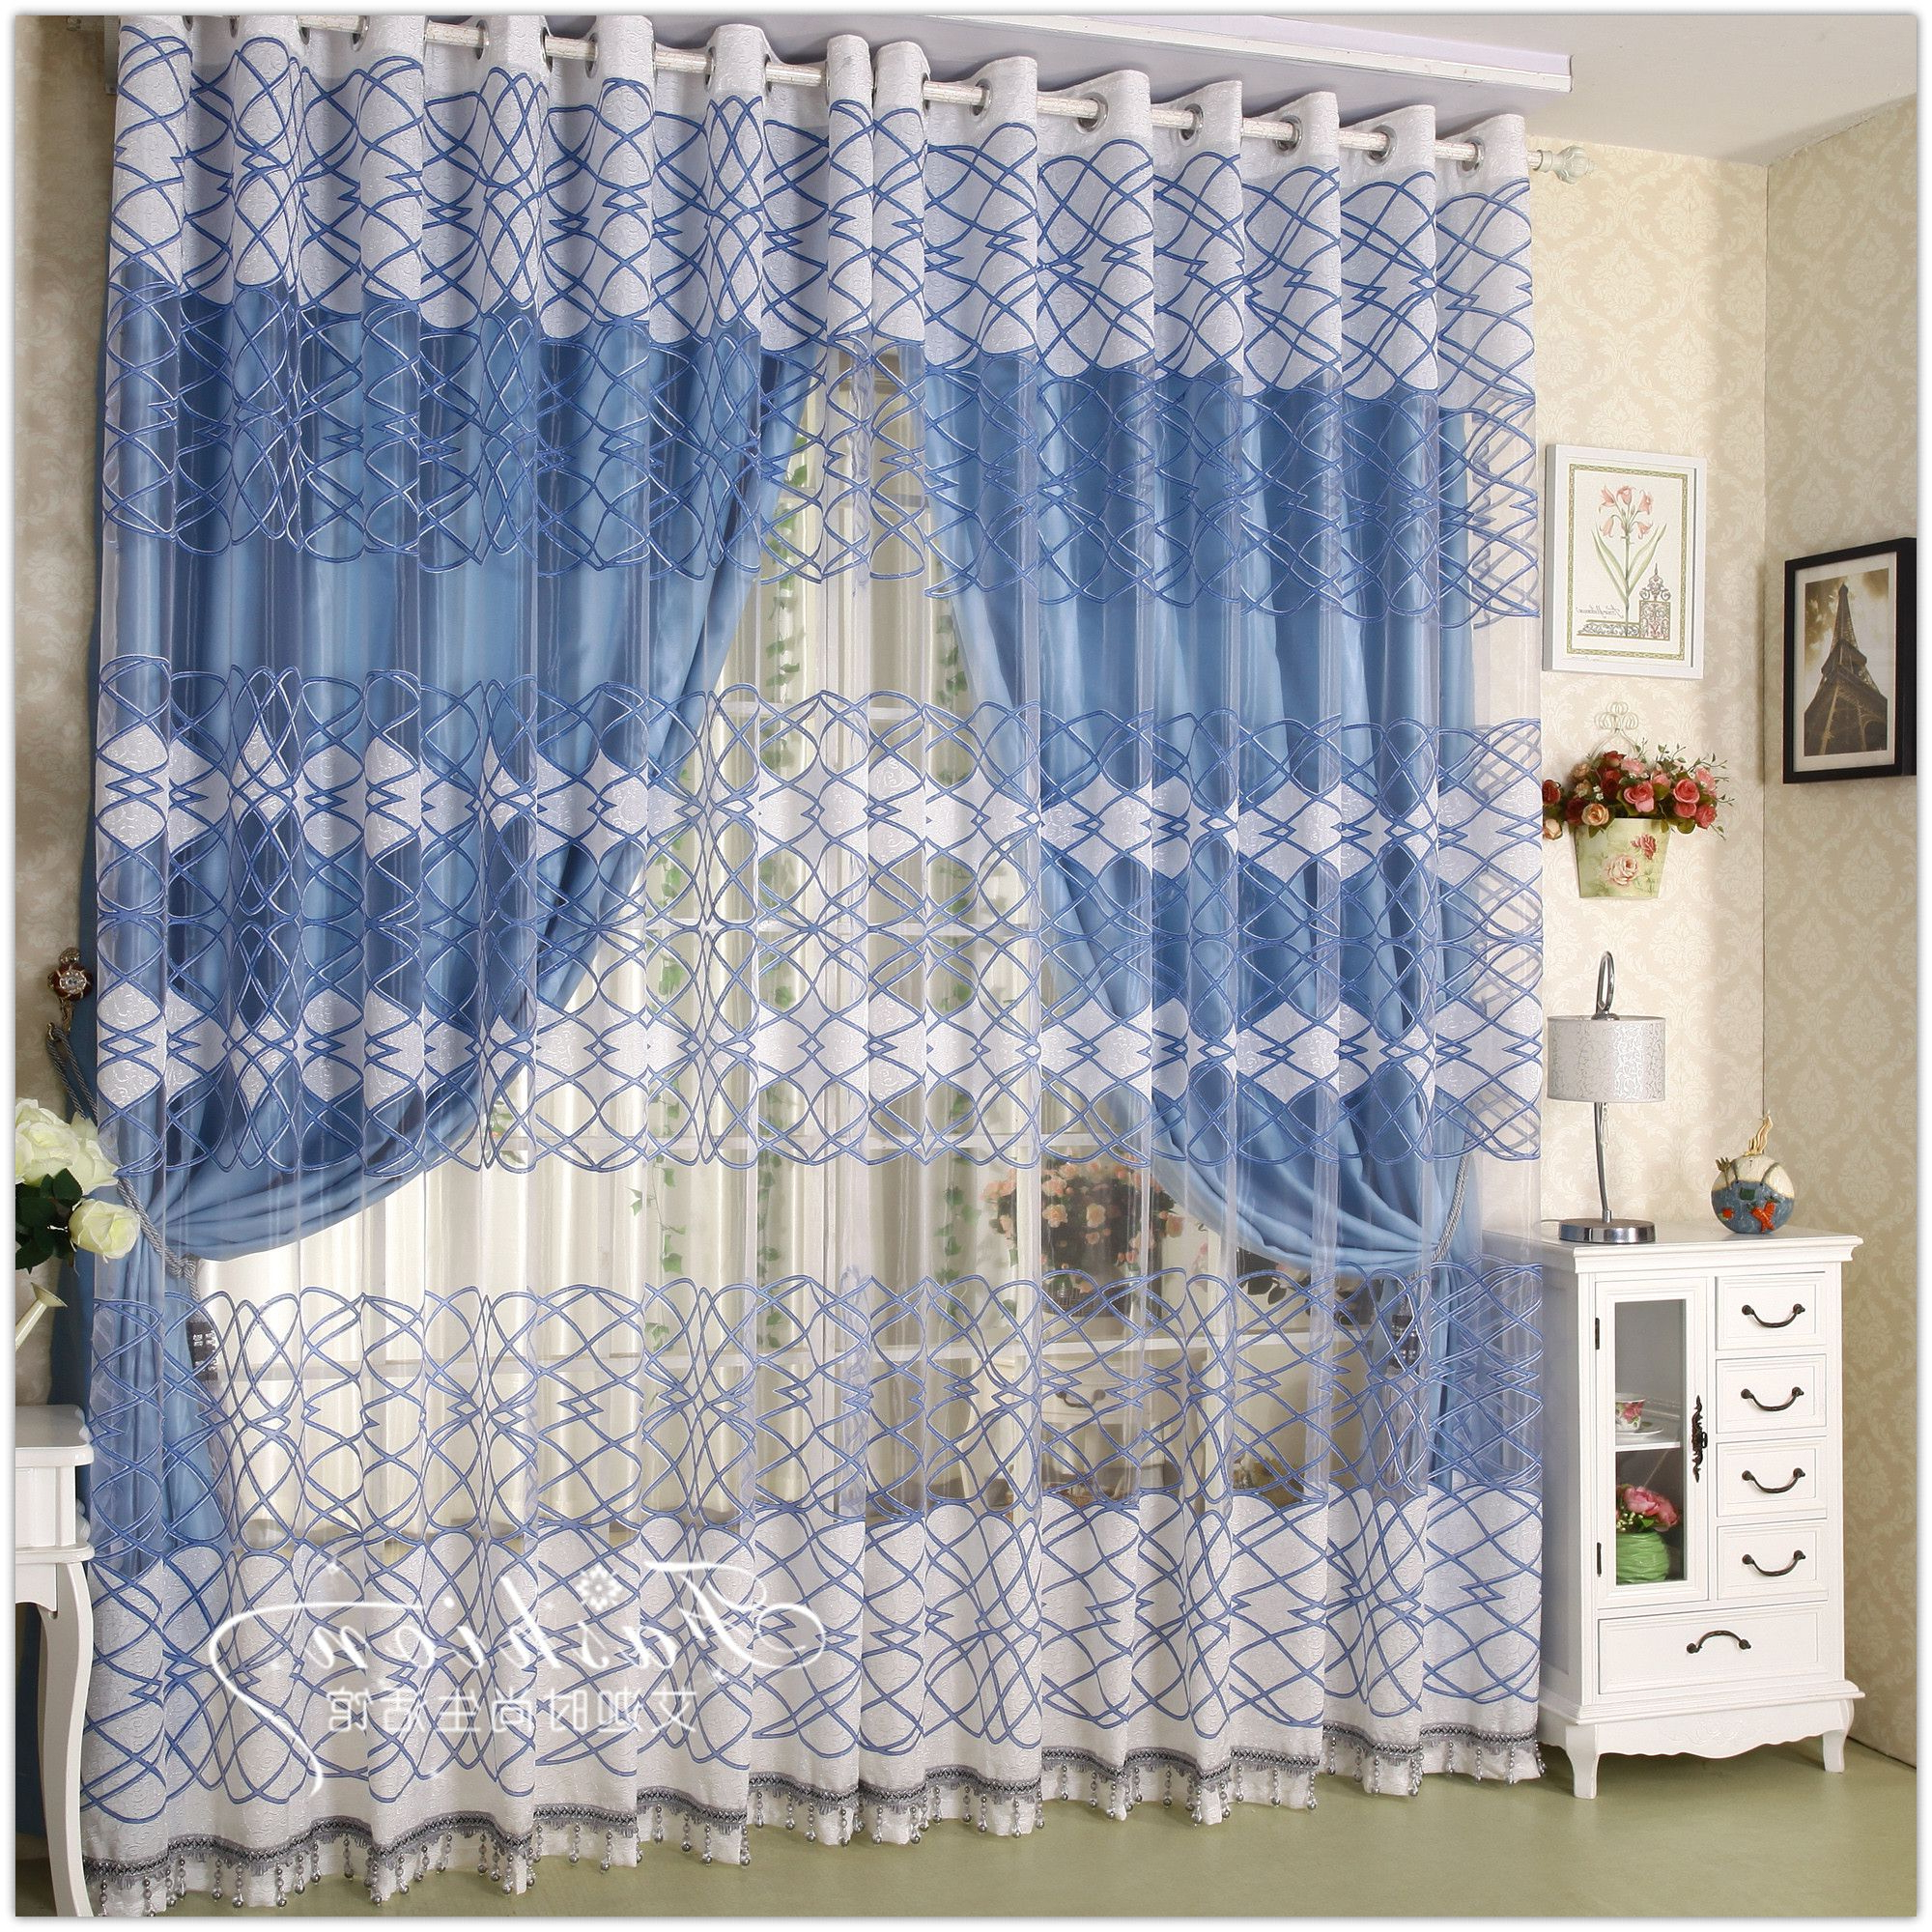 Cotton Curtains For Every Room Drapery Room Ideas